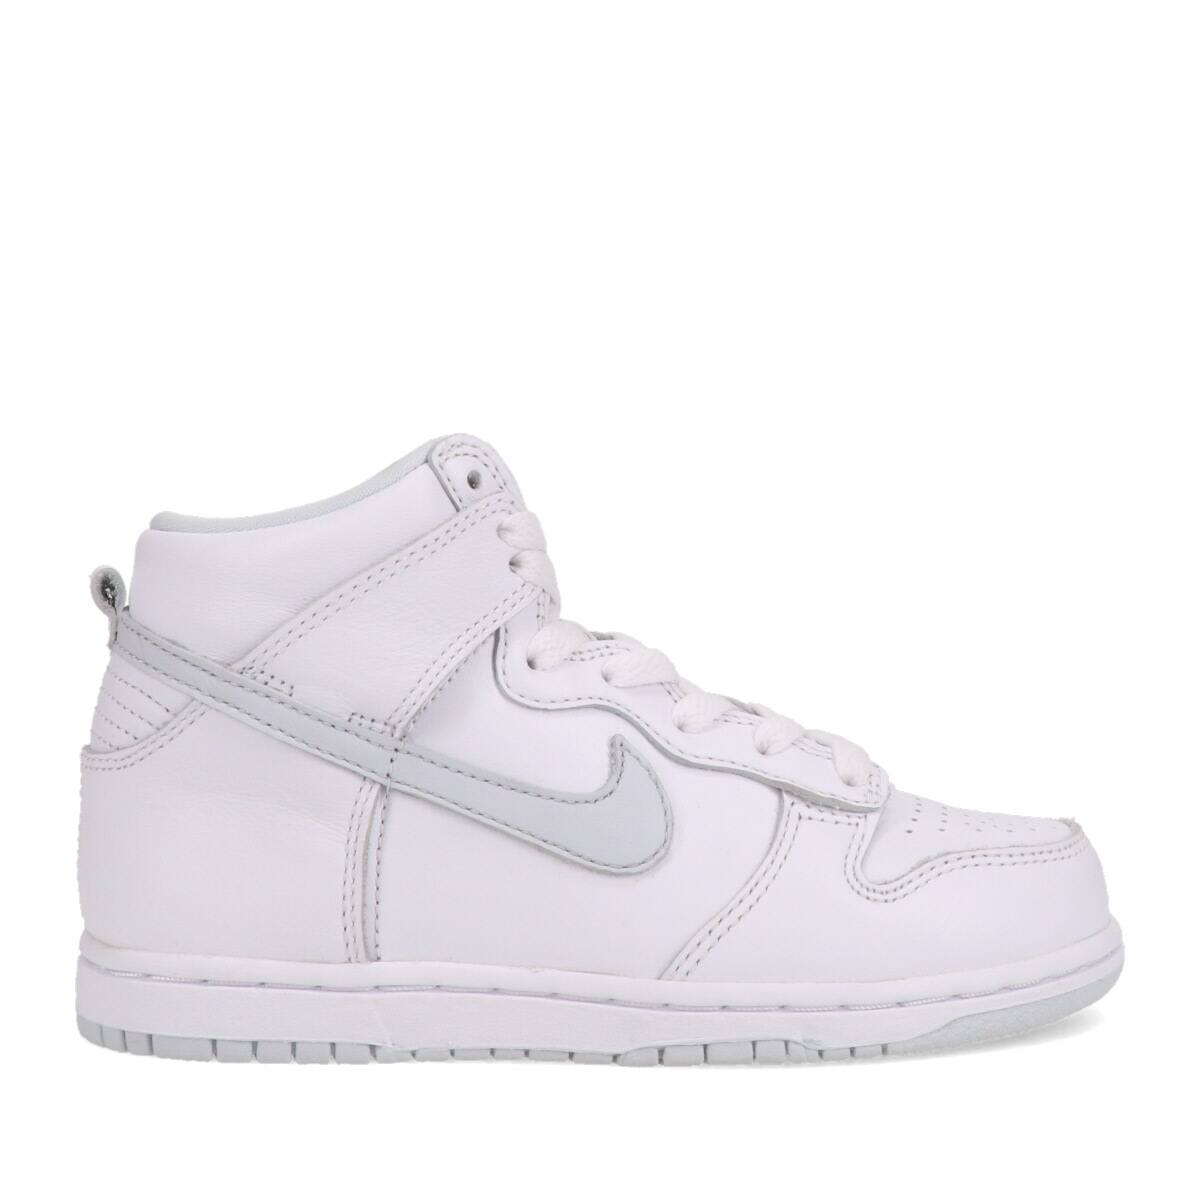 NIKE DUNK HIGH SP (PS) WHITE/PURE PLATINUM 20HO-S